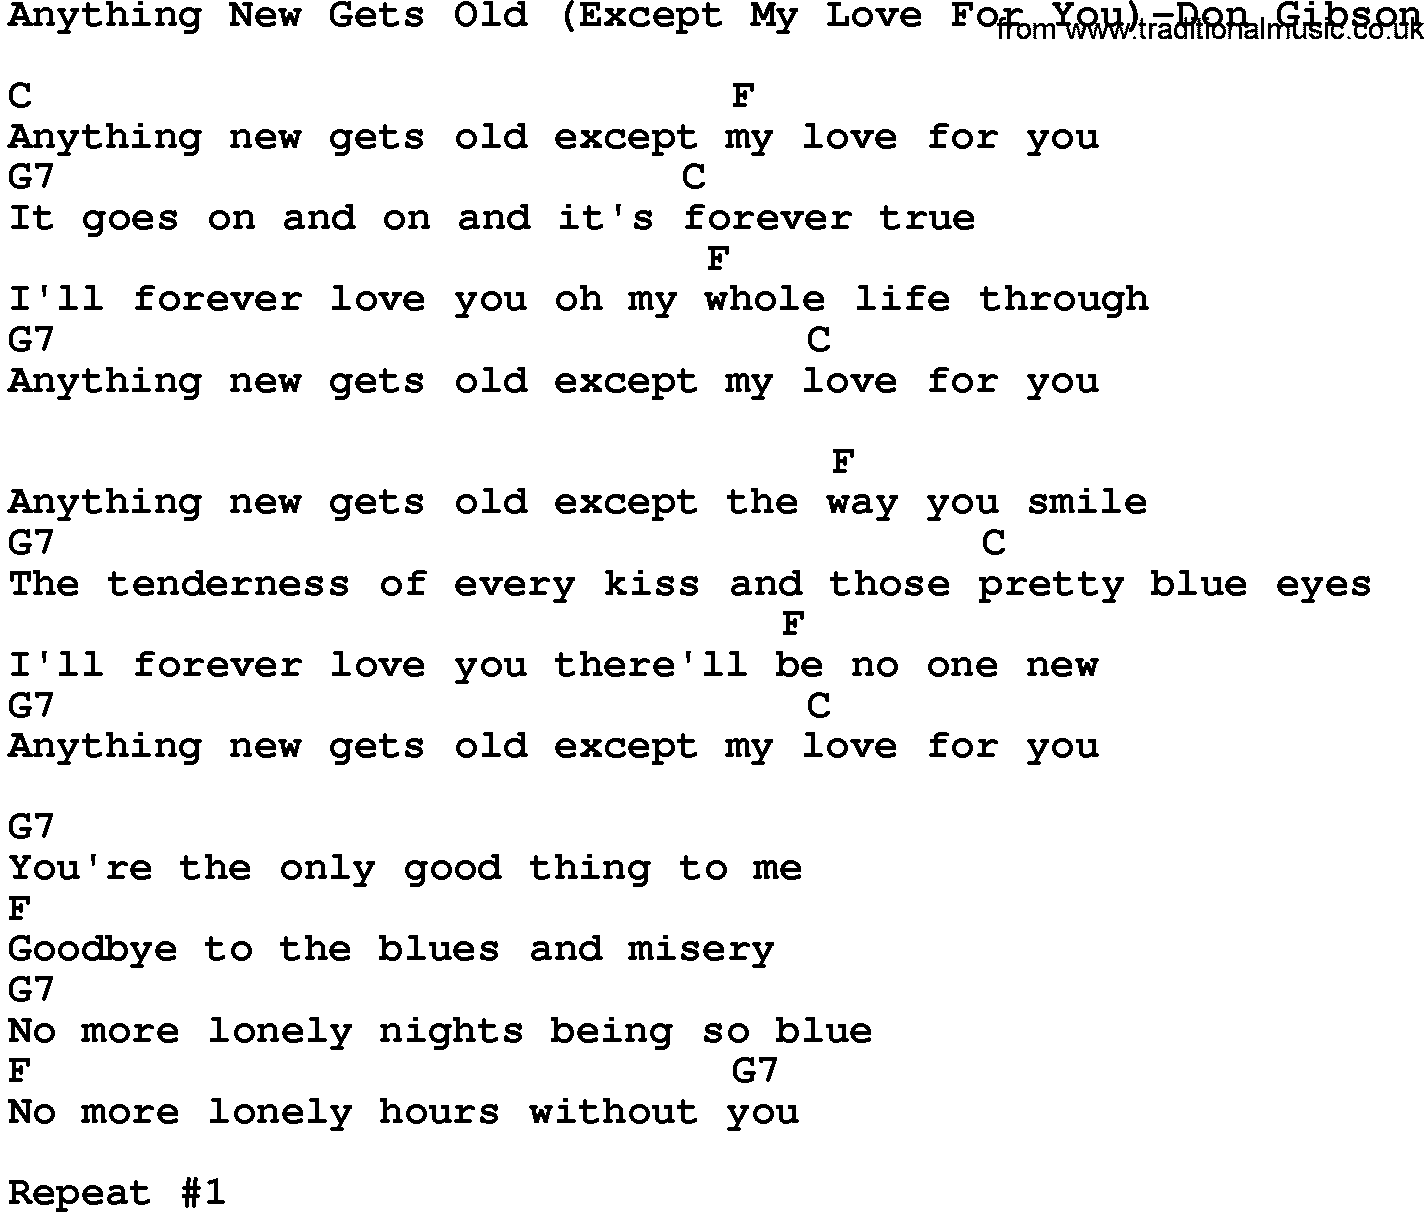 Country music song: Anything New Gets Old(Except My Love For You)-Don Gibson lyrics and chords